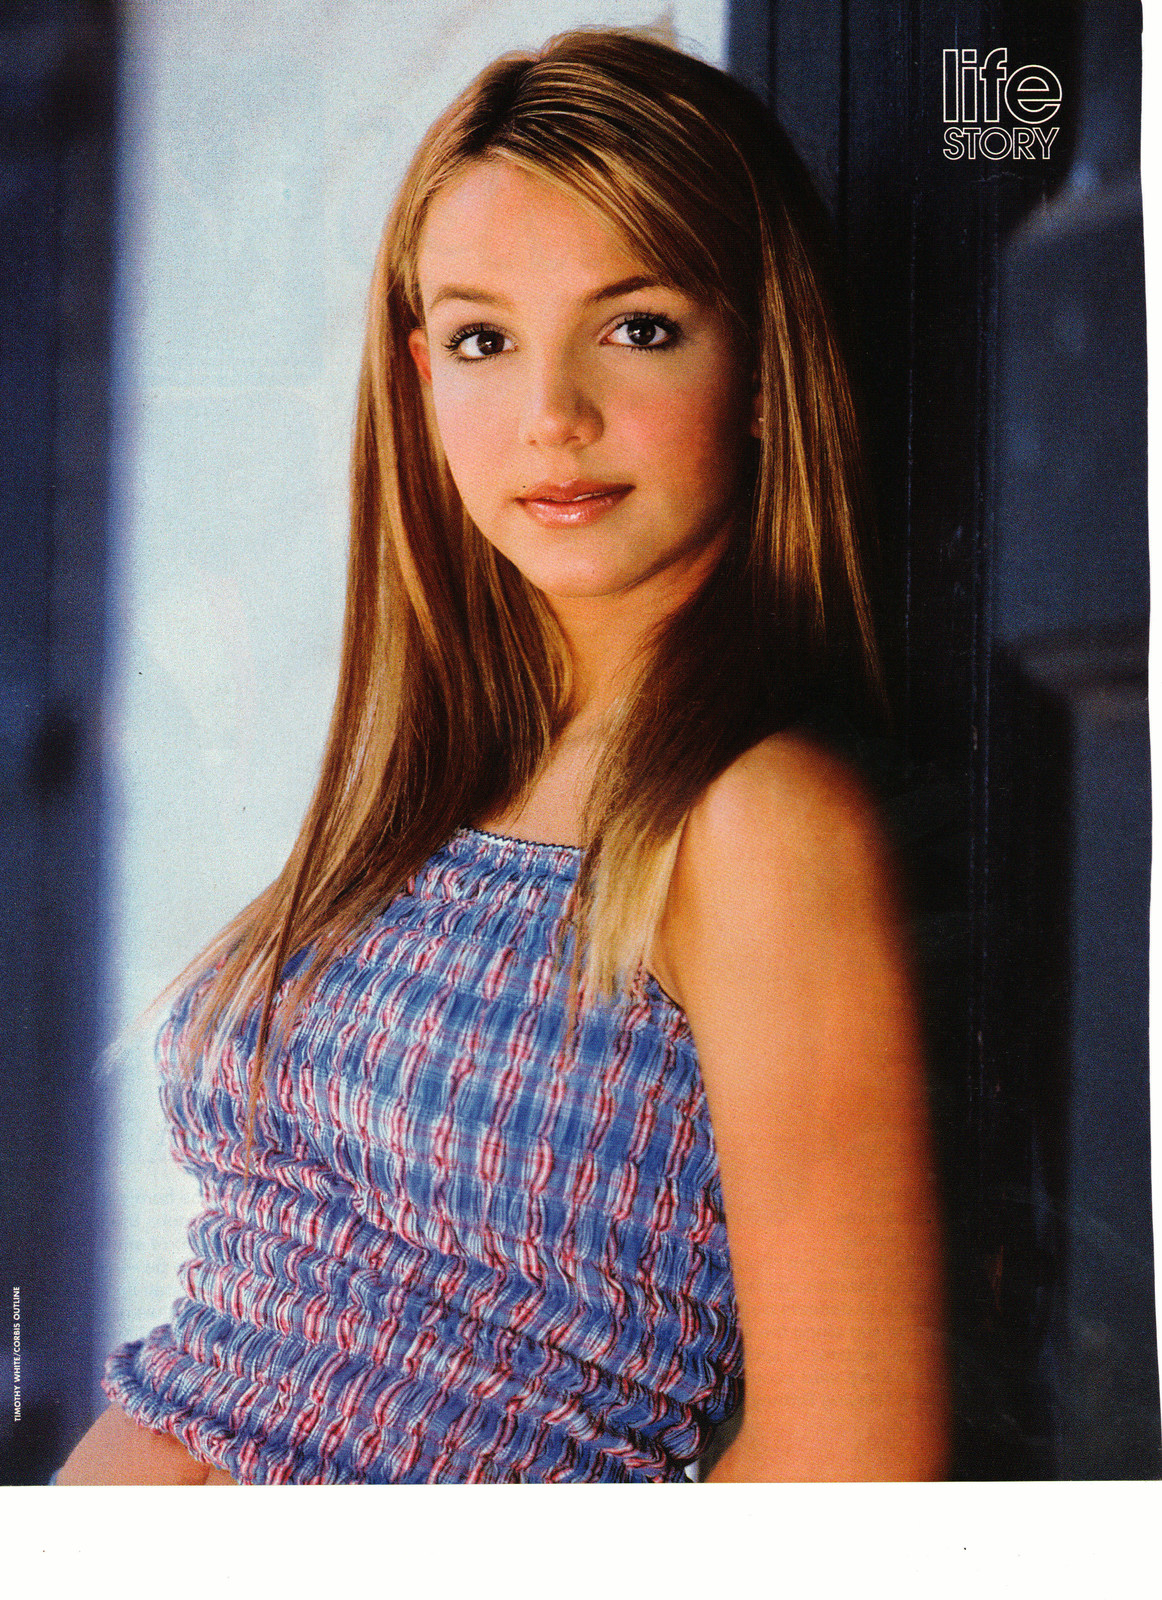 Britney Spears teen magazine pinup clipping by a door Life Story magazine Bop - $3.50